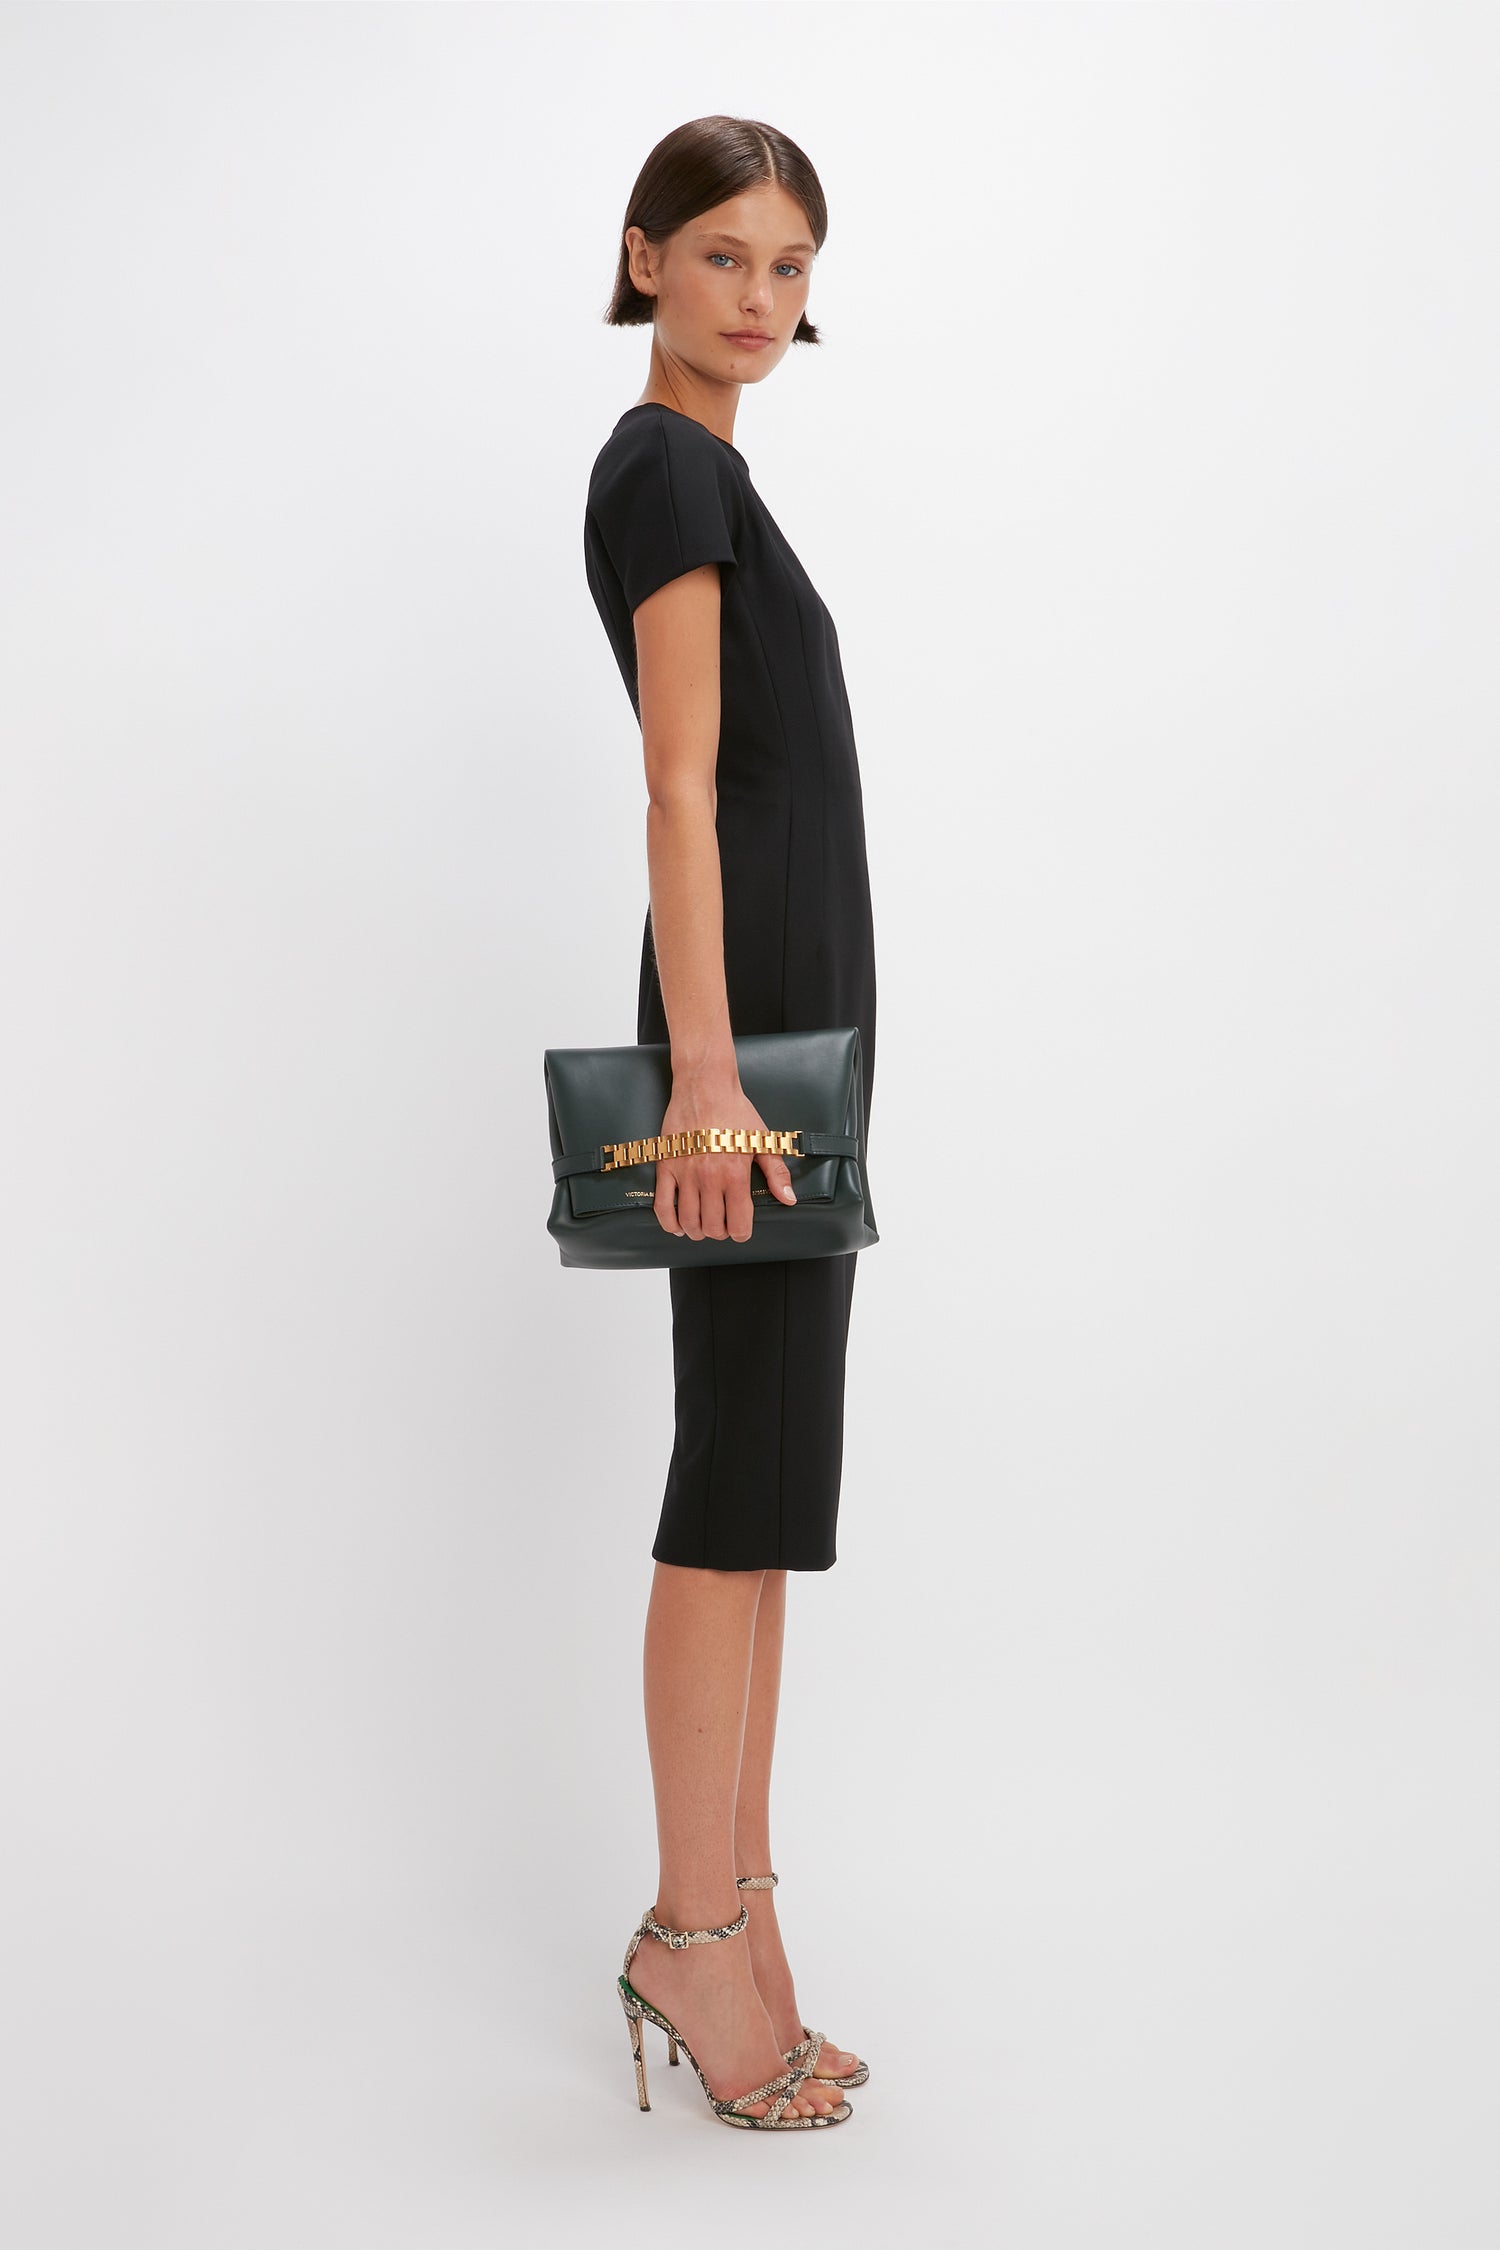 A person in a Victoria Beckham Spiral Fitted T-Shirt Dress In Black, holding a black clutch bag and wearing high-heeled sandals, stands against a plain white background.